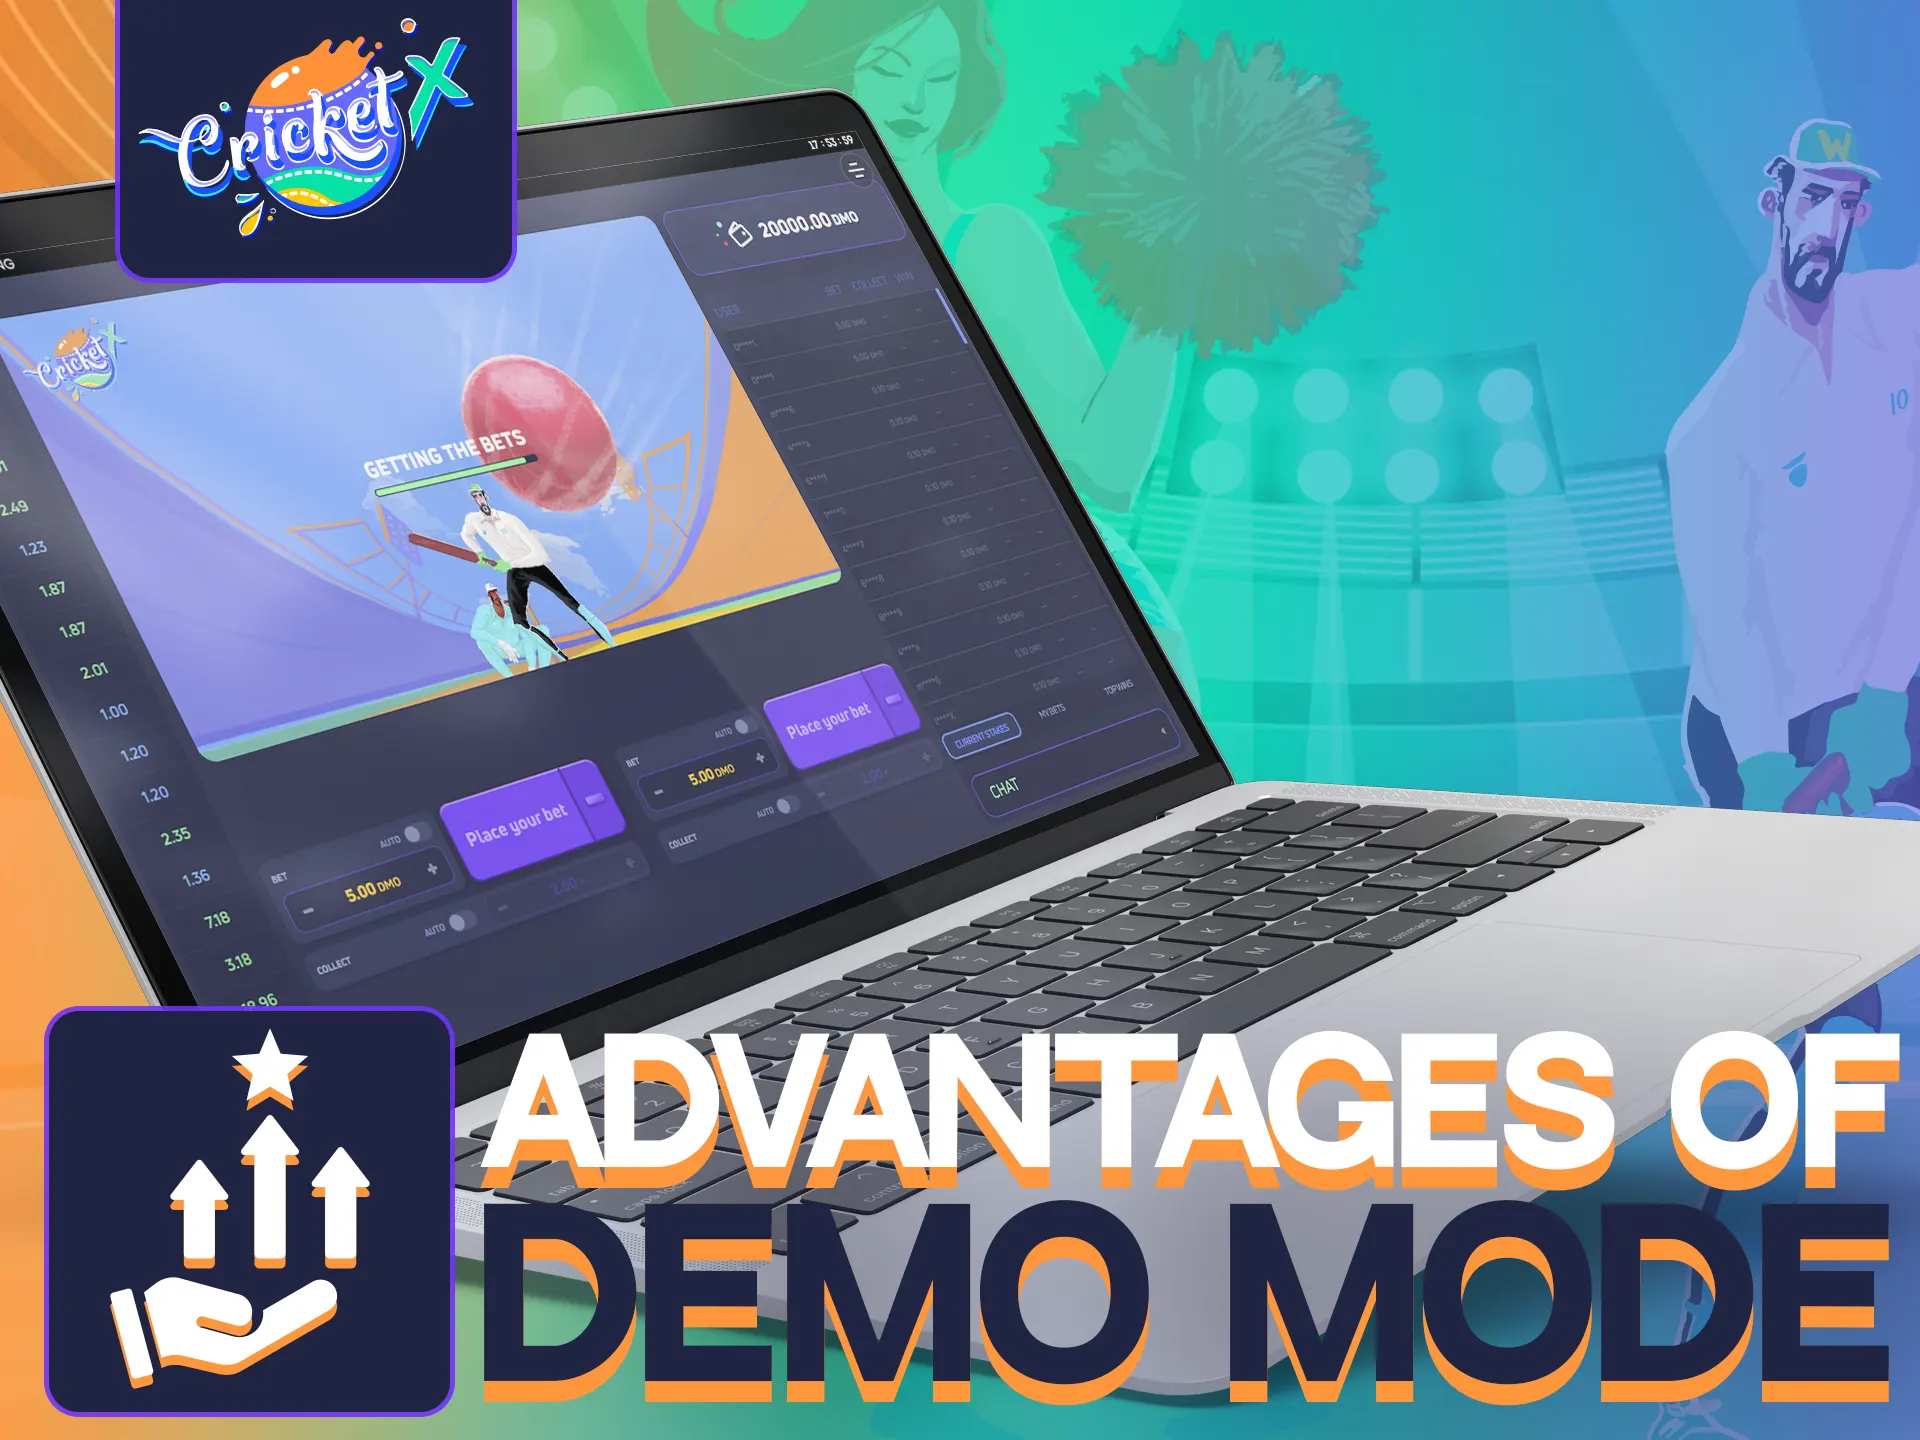 Explore advantages of demo mode of the Cricket-X game.